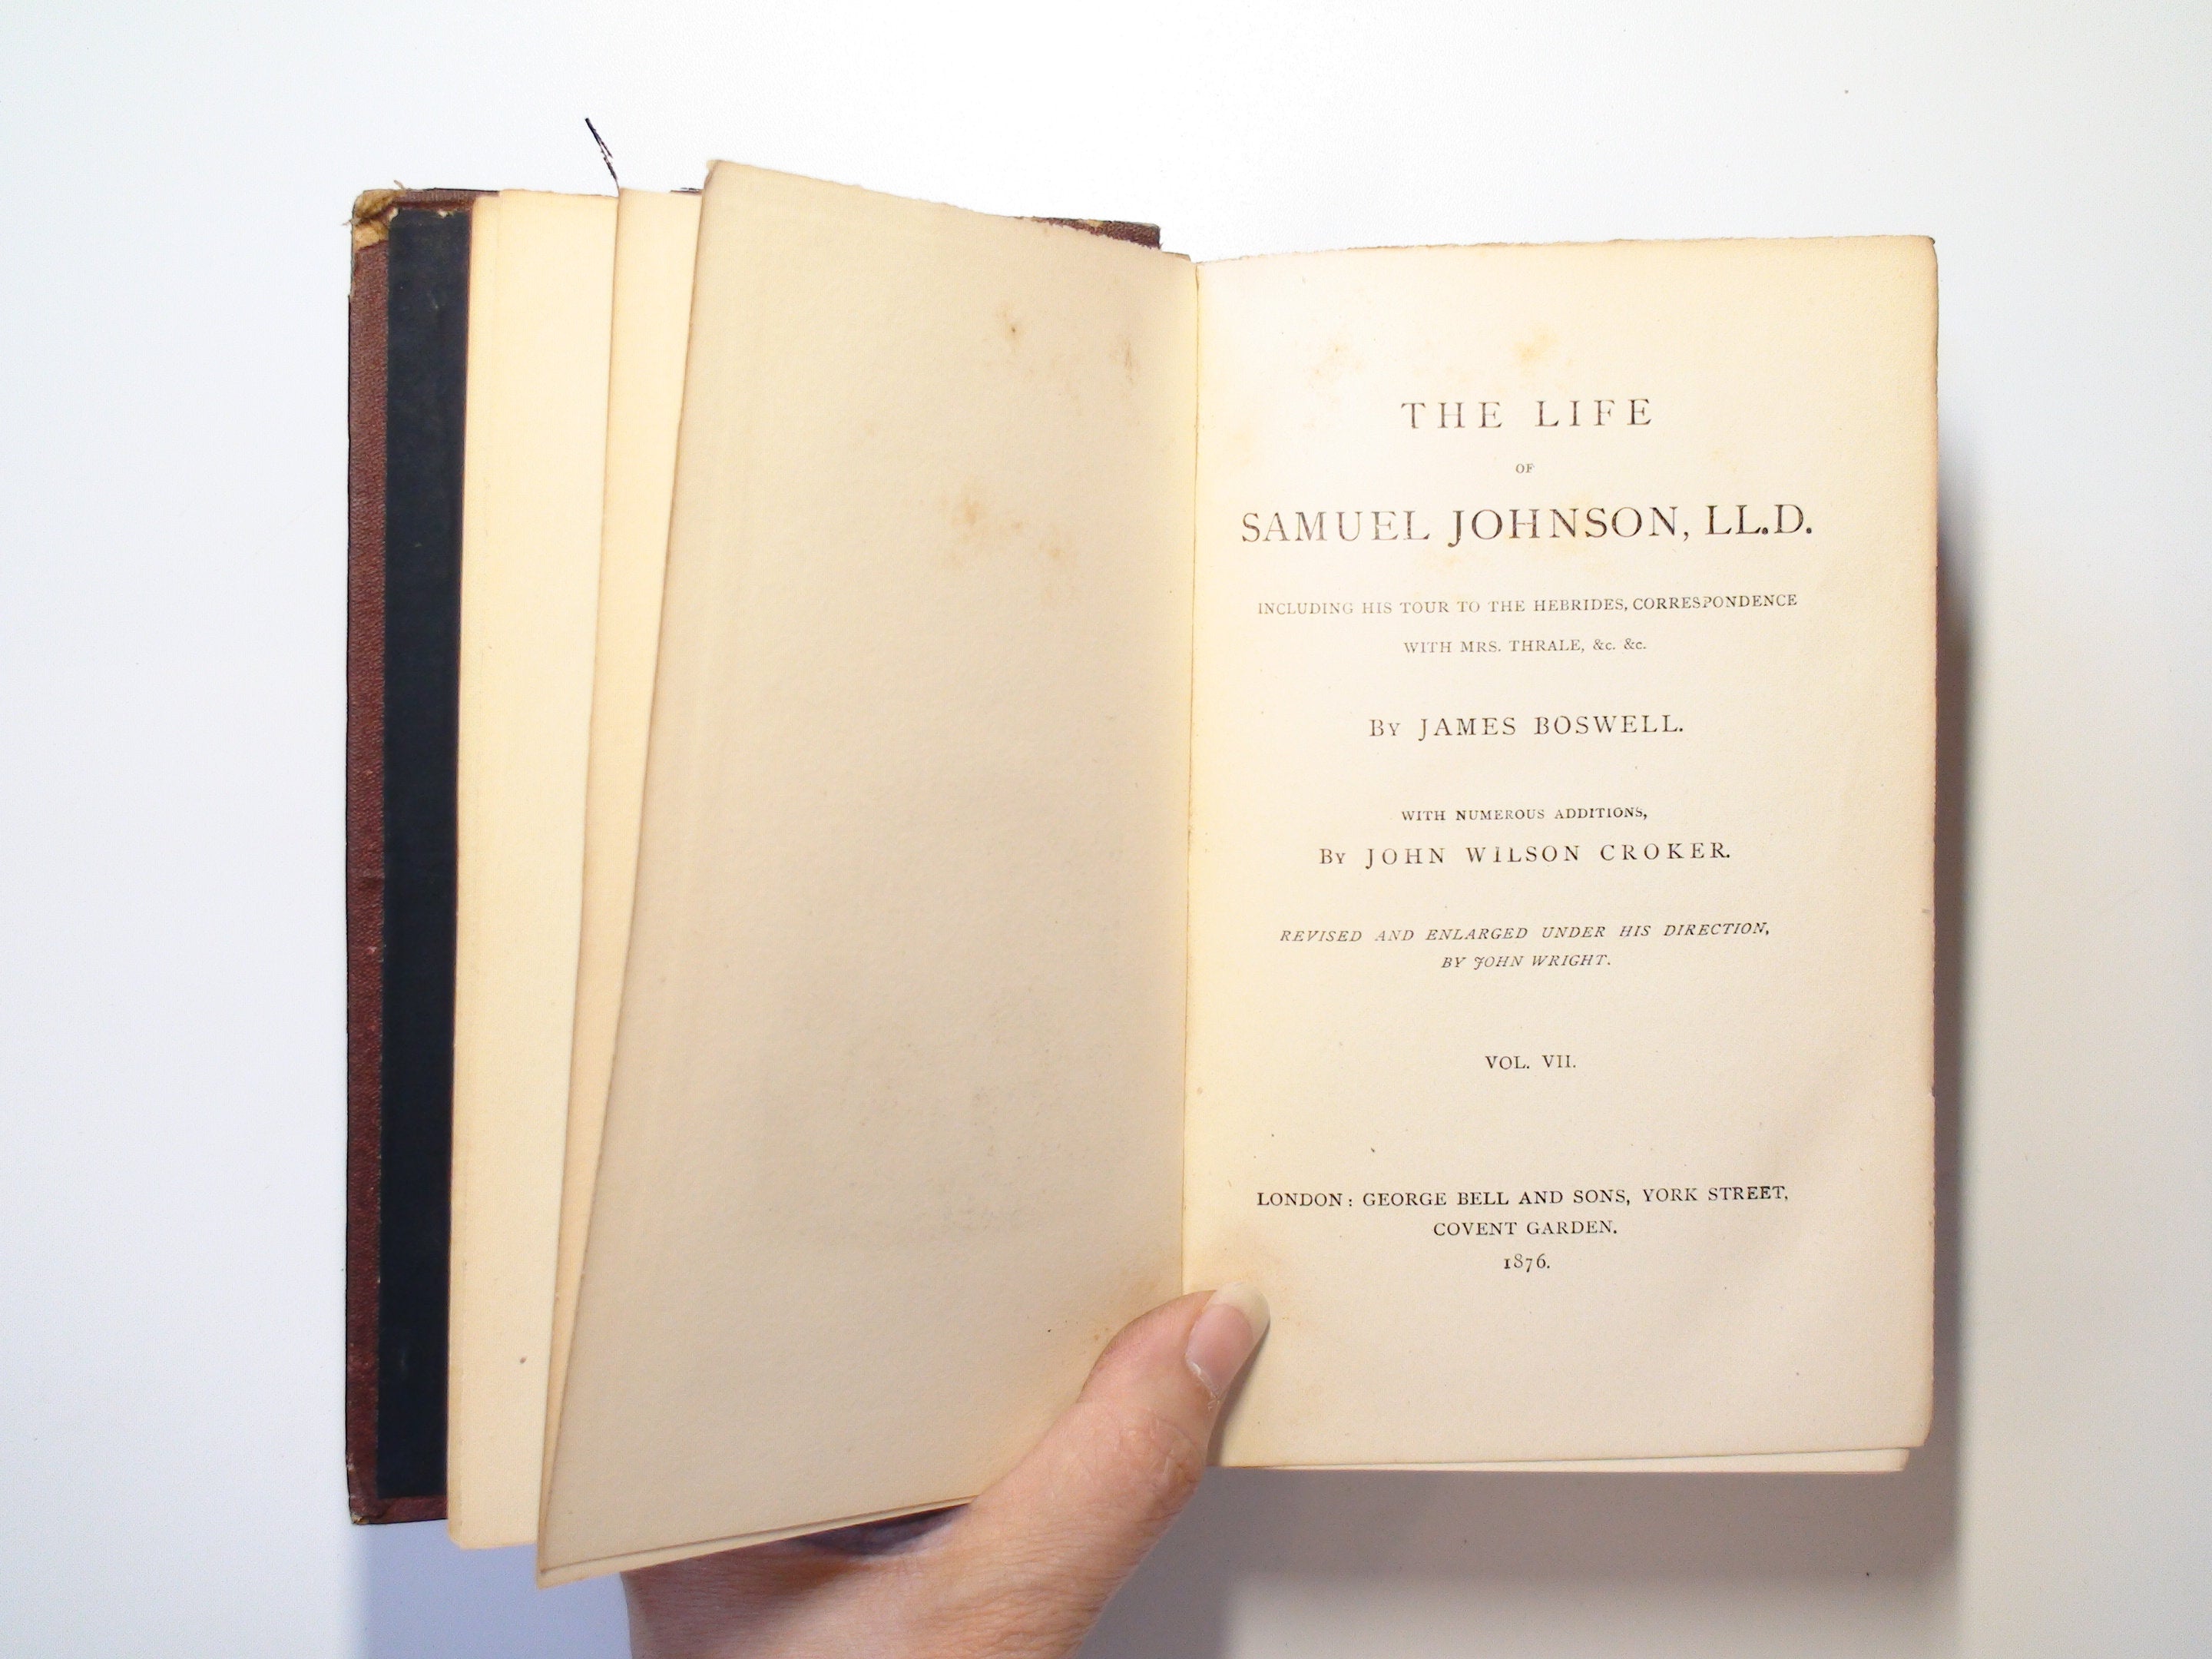 The Life of Samuel Johnson, LL. D., by James Boswell, Vol V, Vol VII, 1876